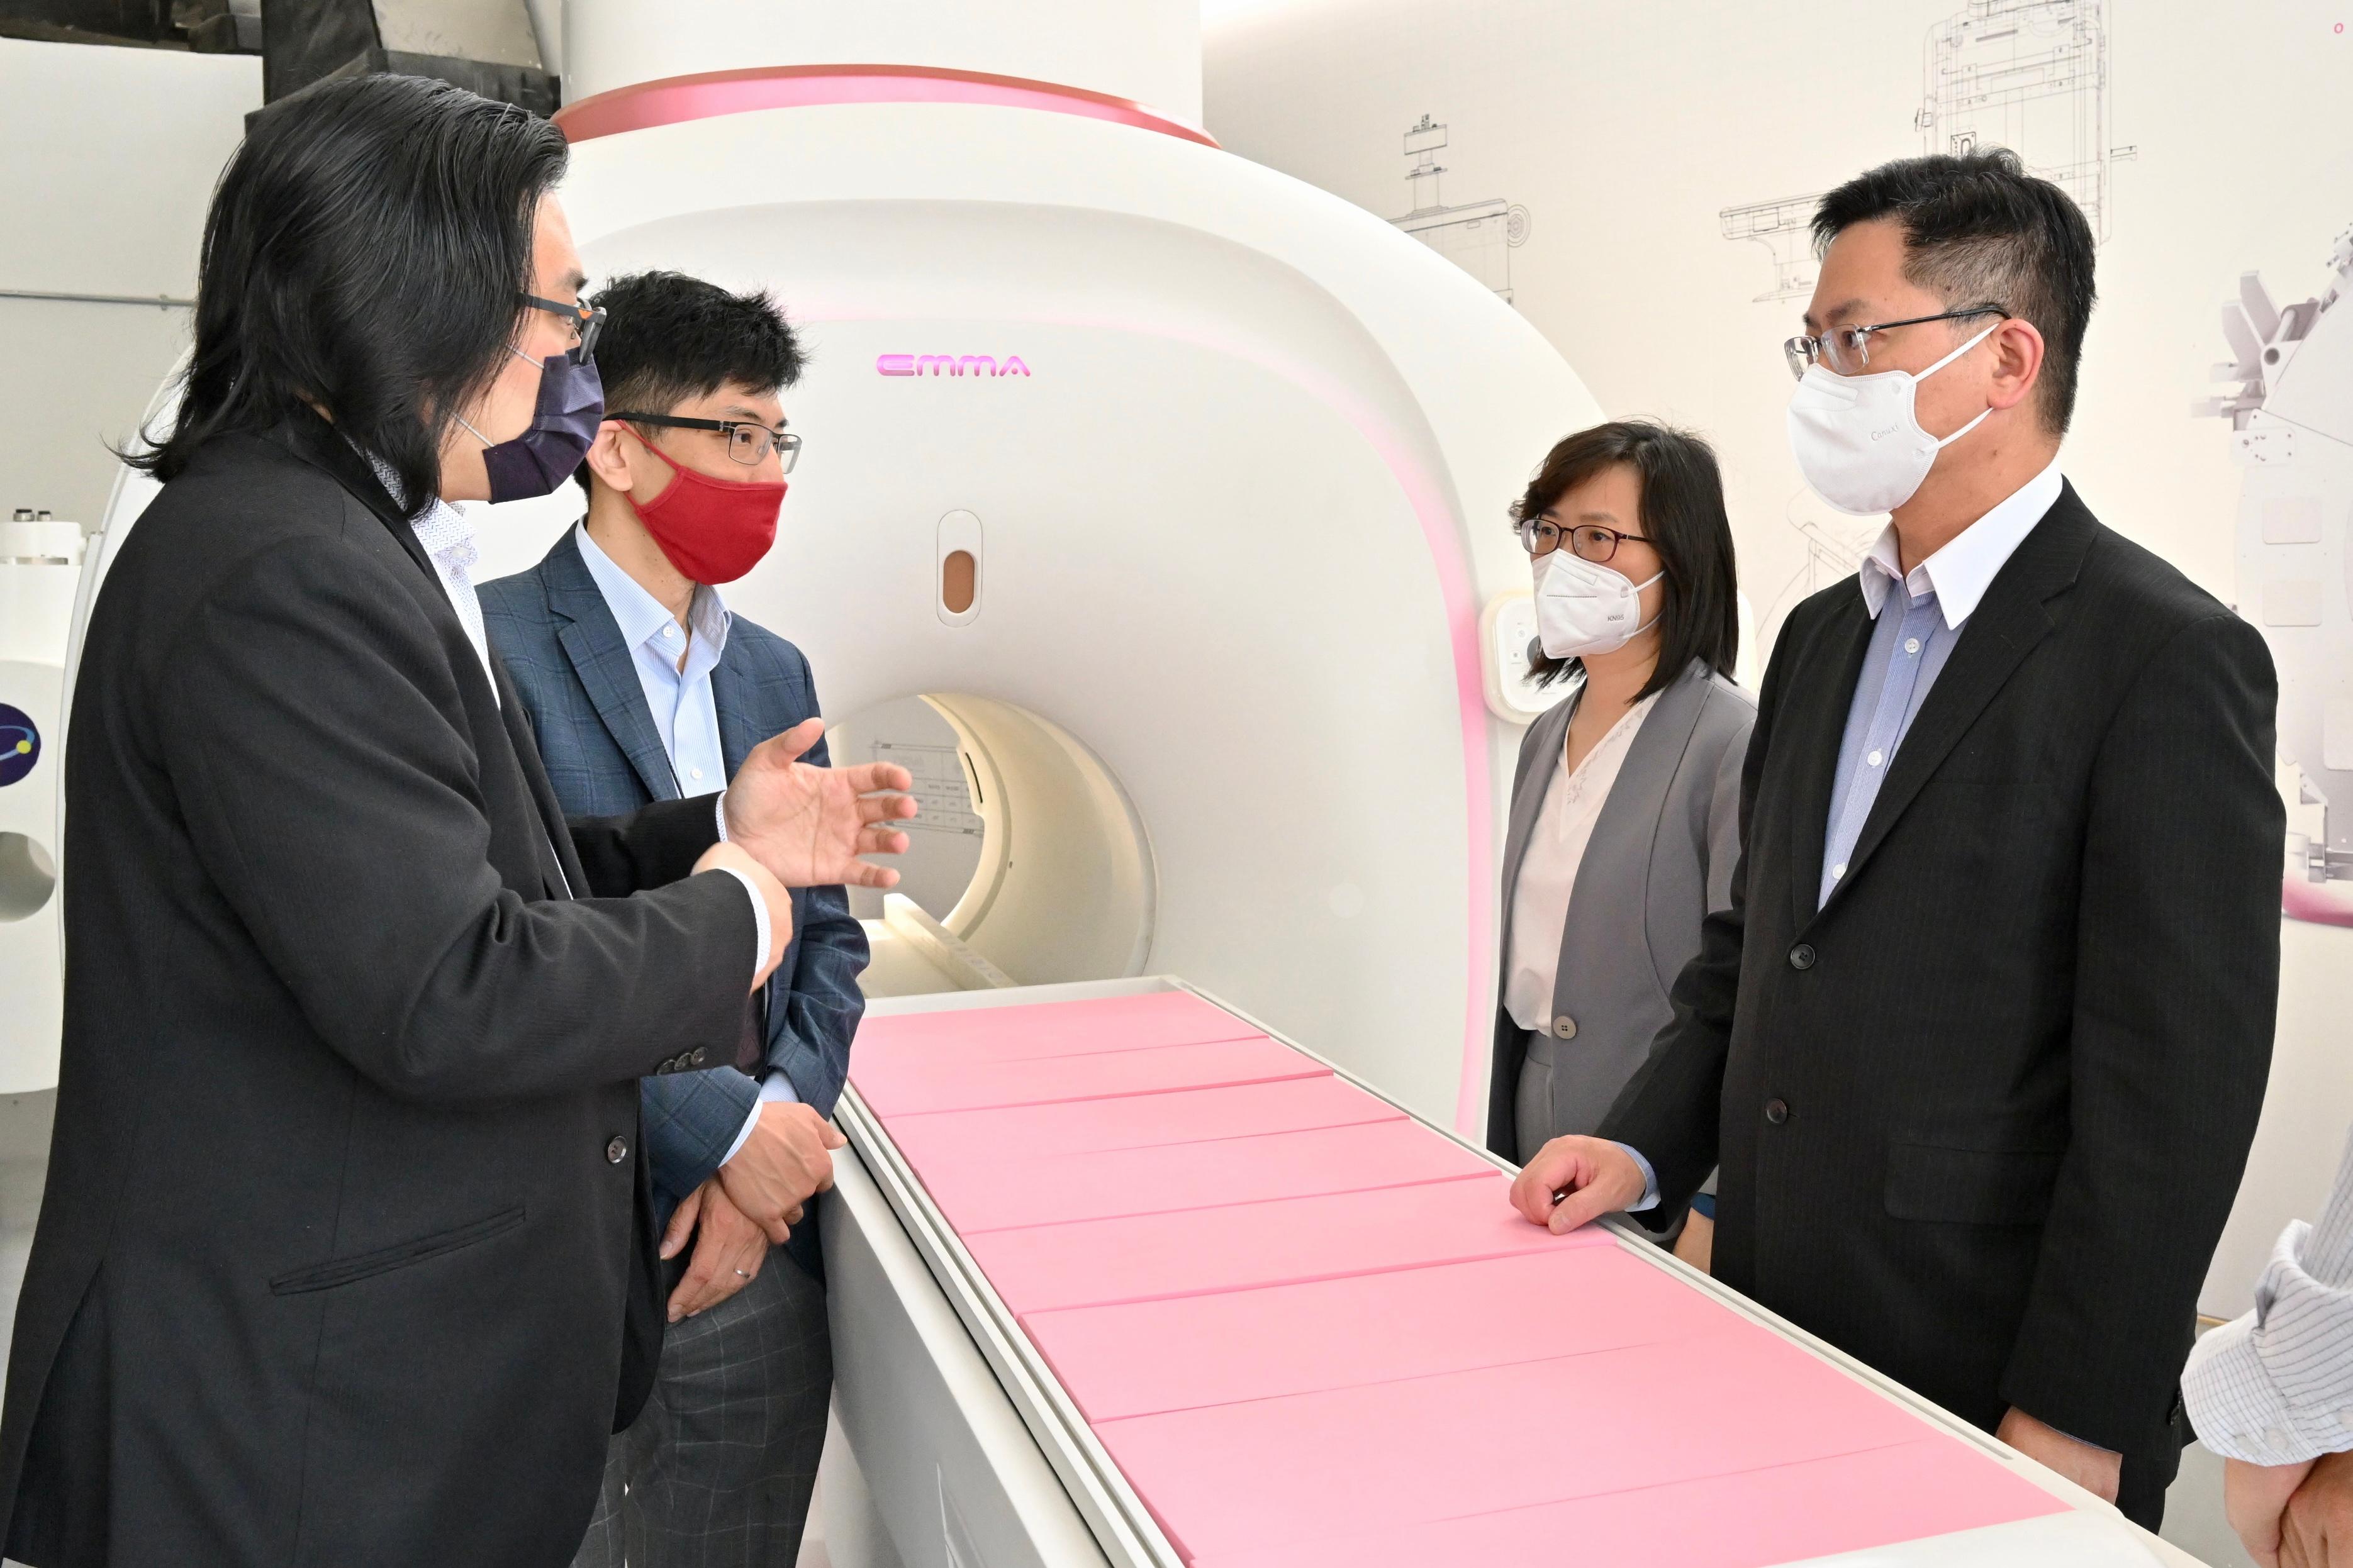 The Secretary for Innovation and Technology, Mr Alfred Sit (first right), together with the Commissioner for Innovation and Technology, Ms Rebecca Pun (second right), today (May 5) visit the MARS Centre at Tai Po InnoPark and see for themselves a breast magnetic resonance imaging system developed by an enterprise.